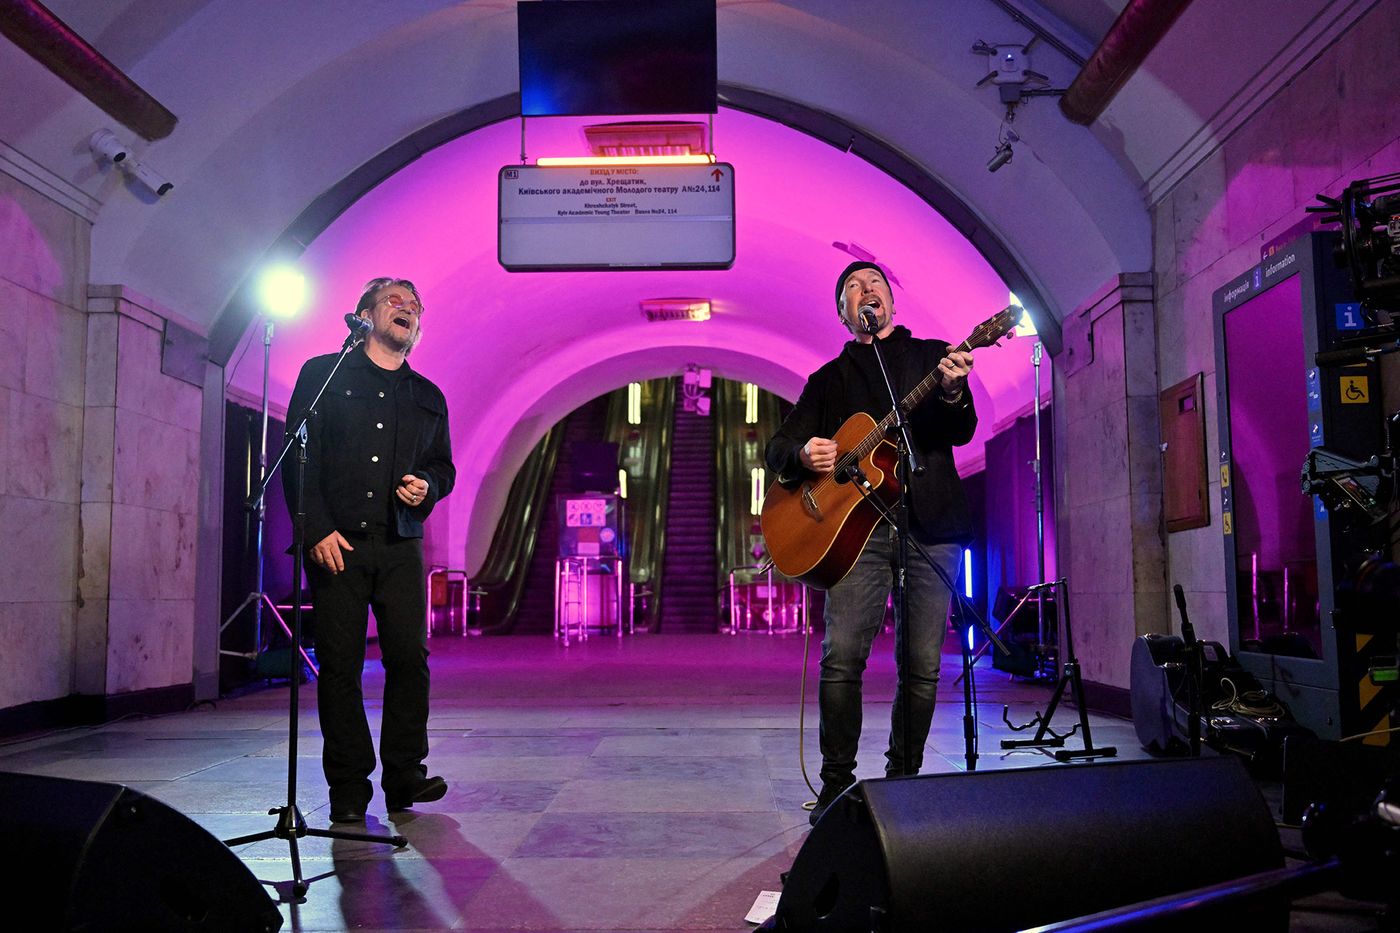 Song for solidarity: After Pink Floyd song release, U2 performs at bomb shelter in Ukraine